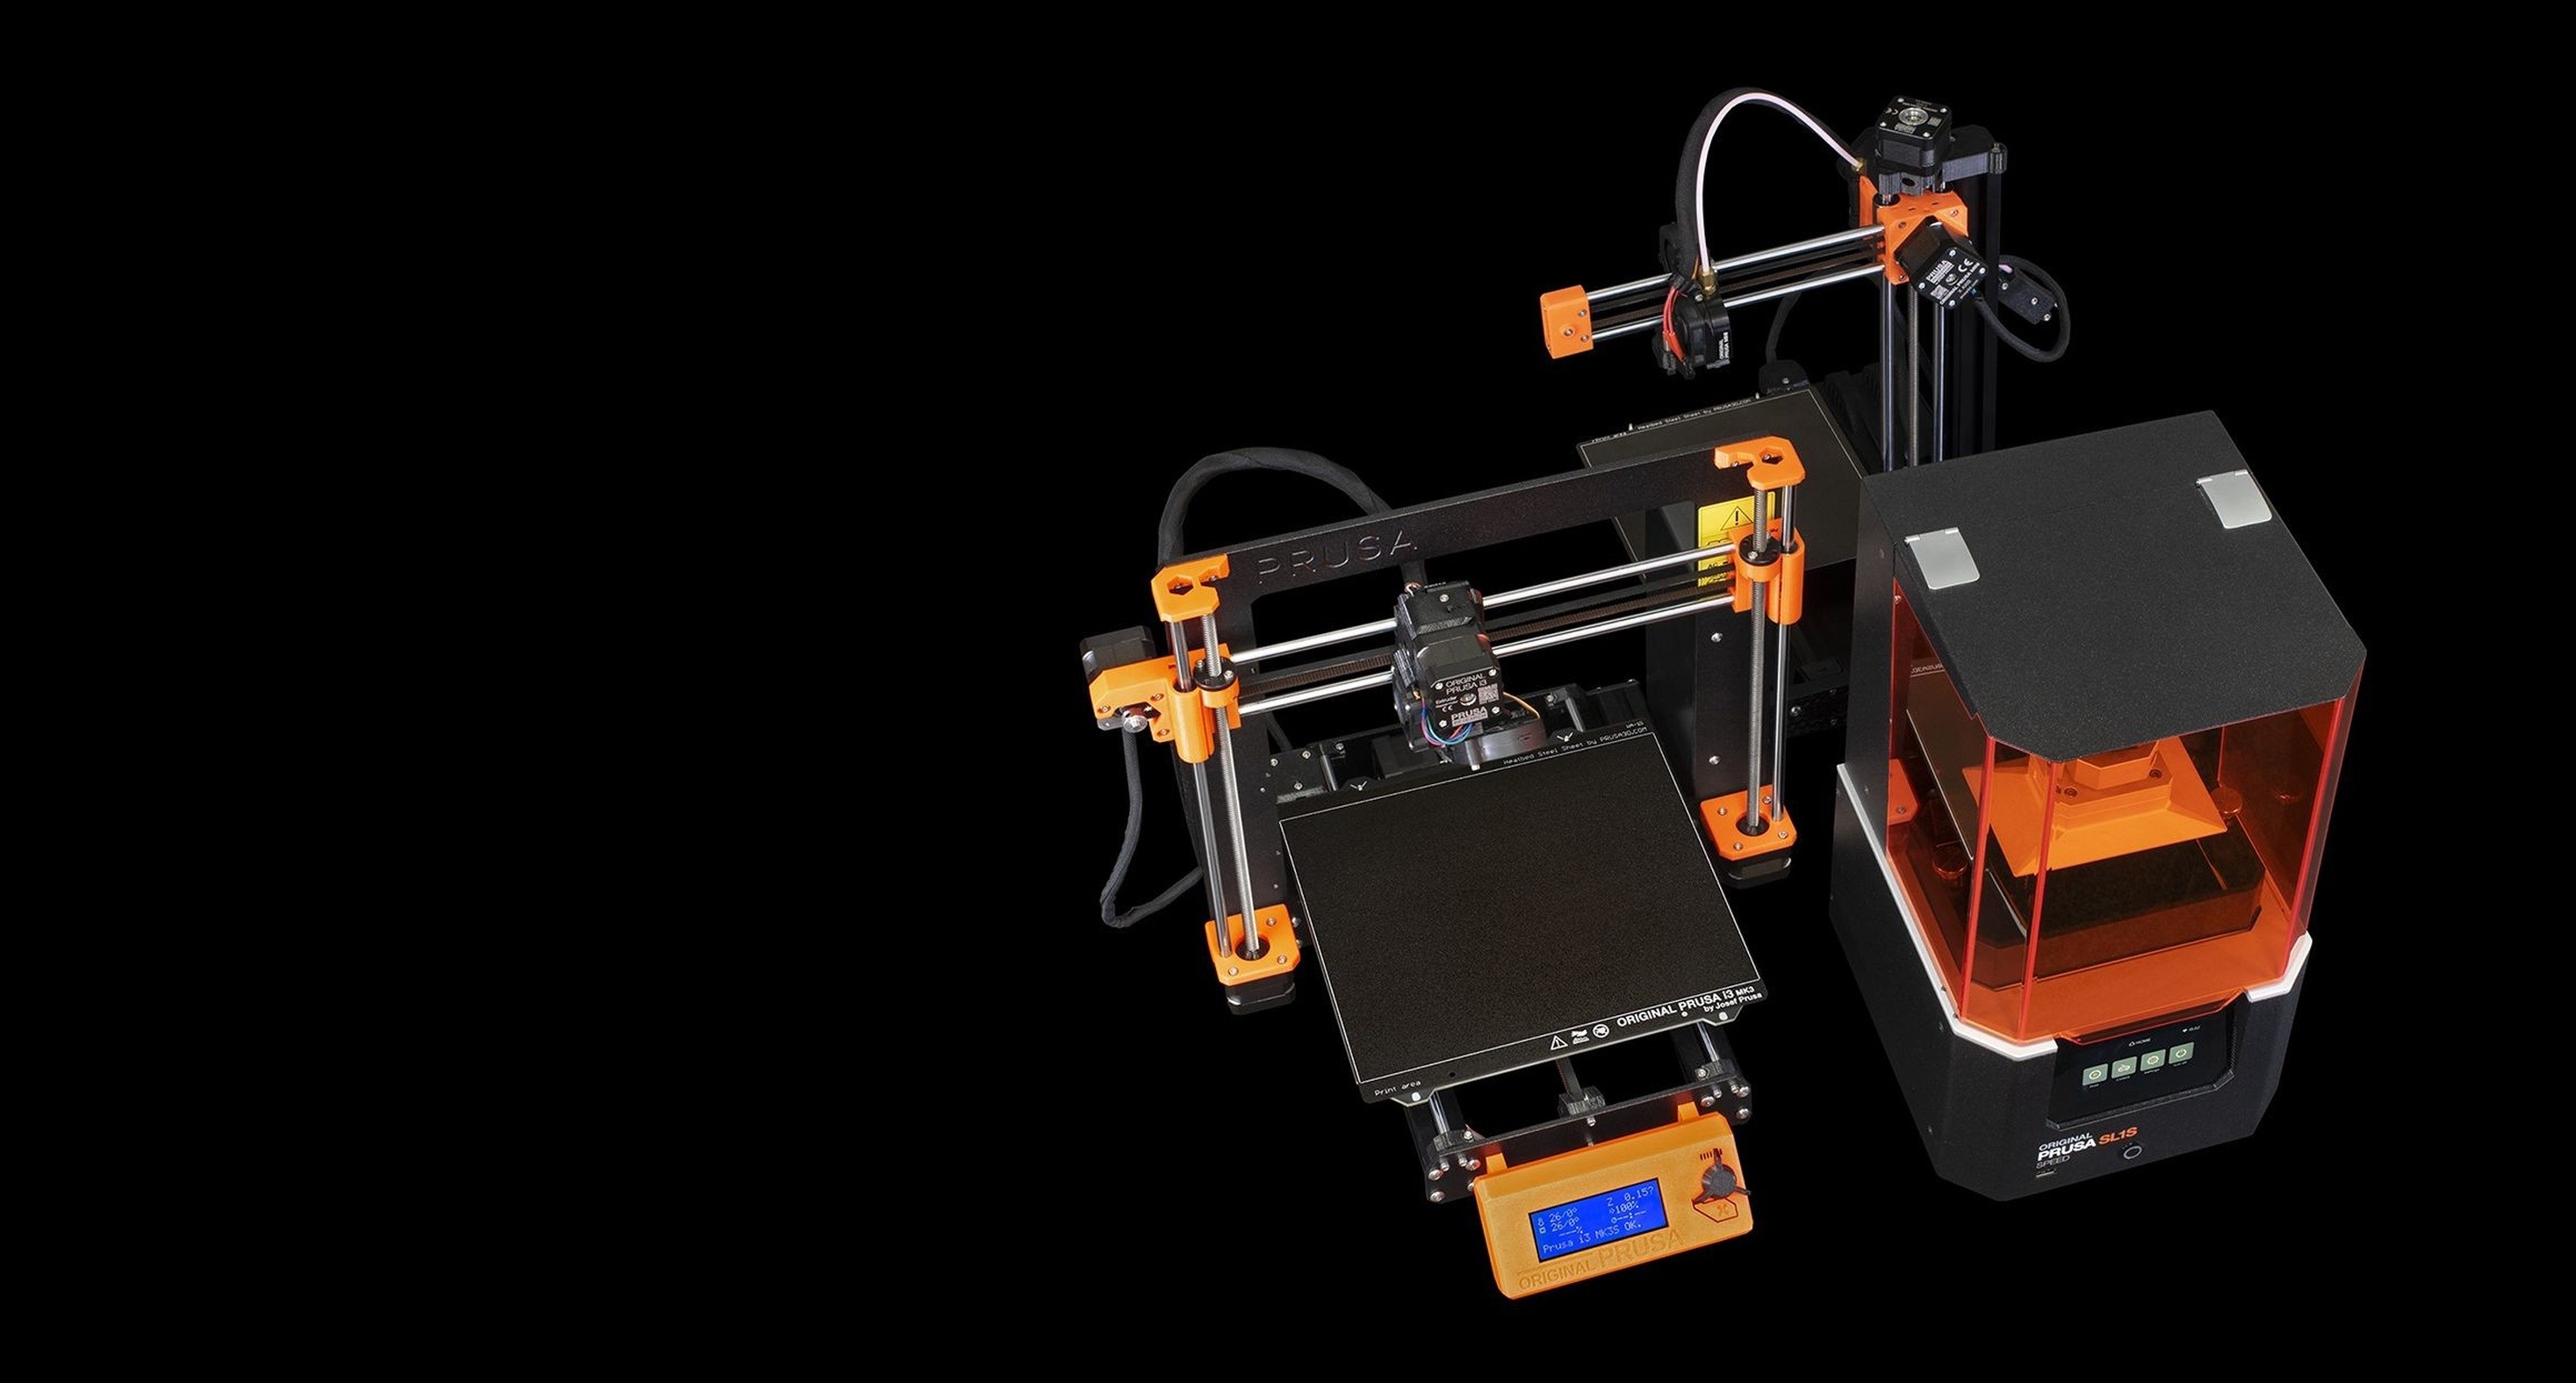 over Officer side 3D printers | Original Prusa 3D printers directly from Josef Prusa